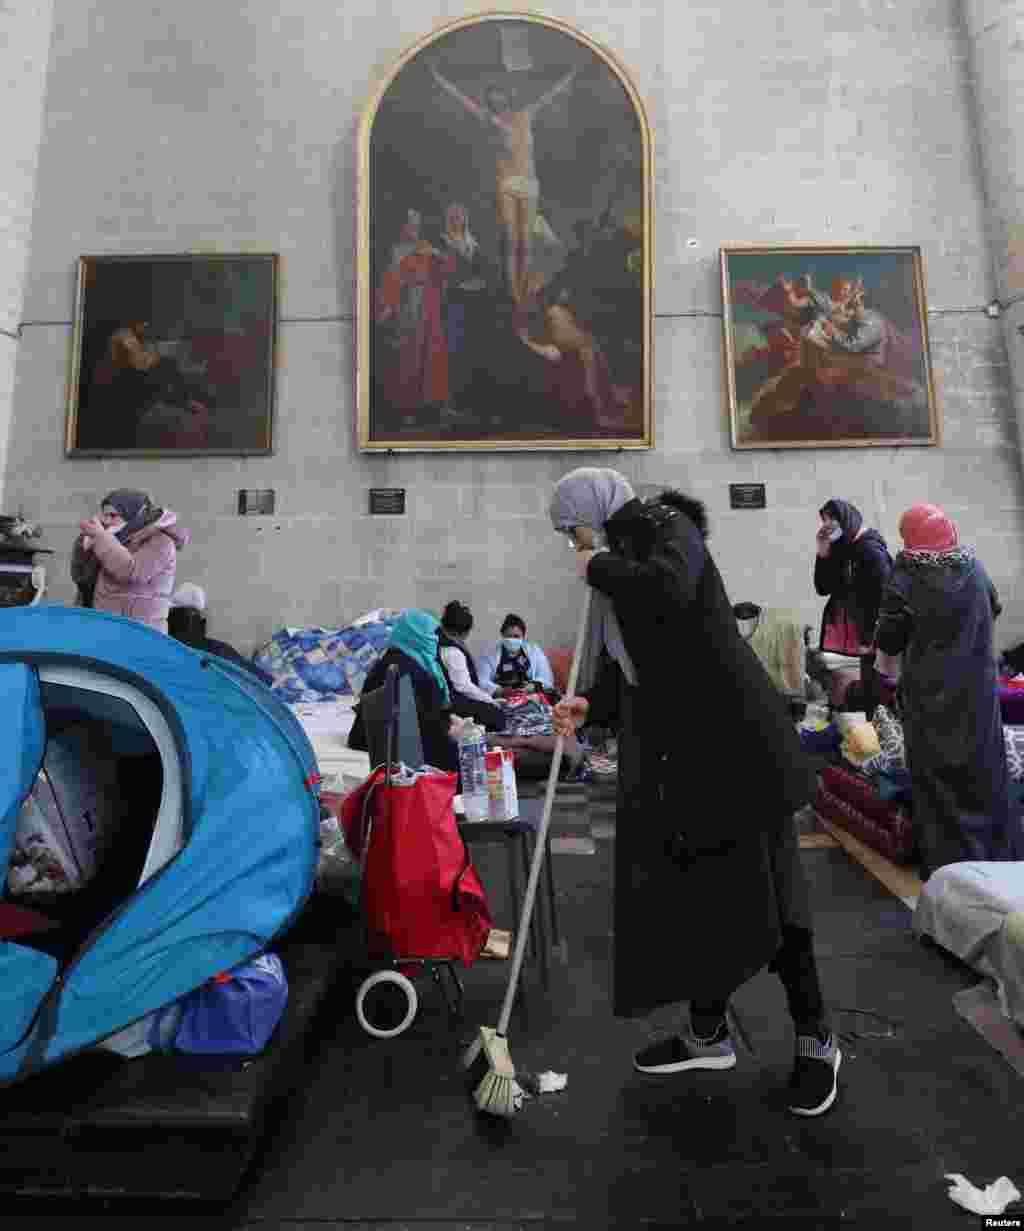 Illegal migrants, requesting to be regularized by the Belgian government to have access to heathcare, reside inside the Saint-Jean-Baptiste-au-Beguinage church during the COVID-19 outbreak, in Brussels, Belgium, Feb. 23, 2021.